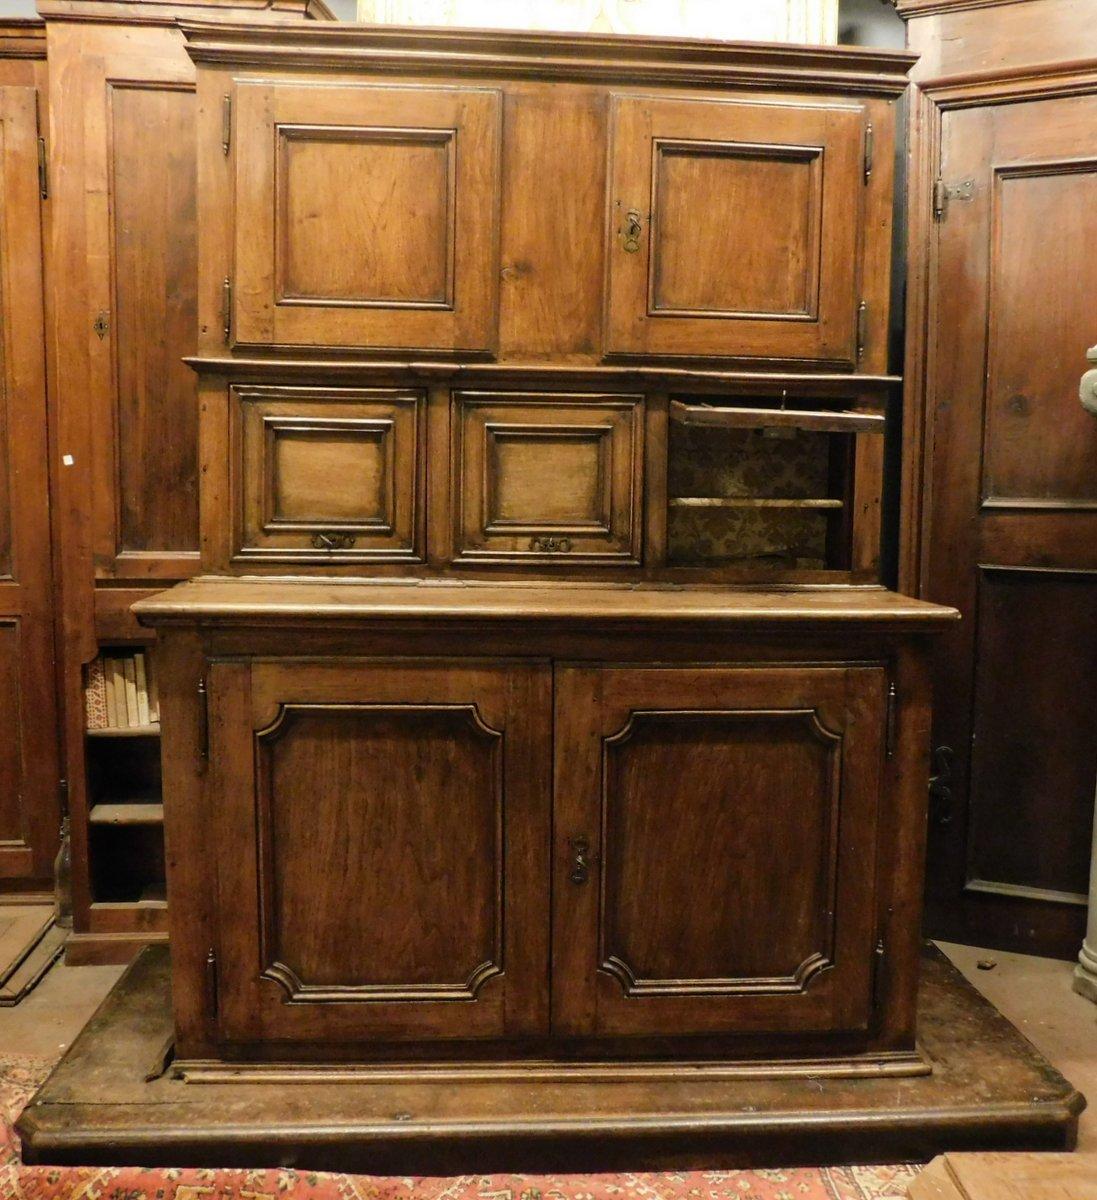 Antique sacristy furniture, double-bodied furniture, all hand-carved in the panels, in precious walnut wood, complete with a raised stage base, with upper and lower doors and central doors that return when rising, built by hand in the early 18th